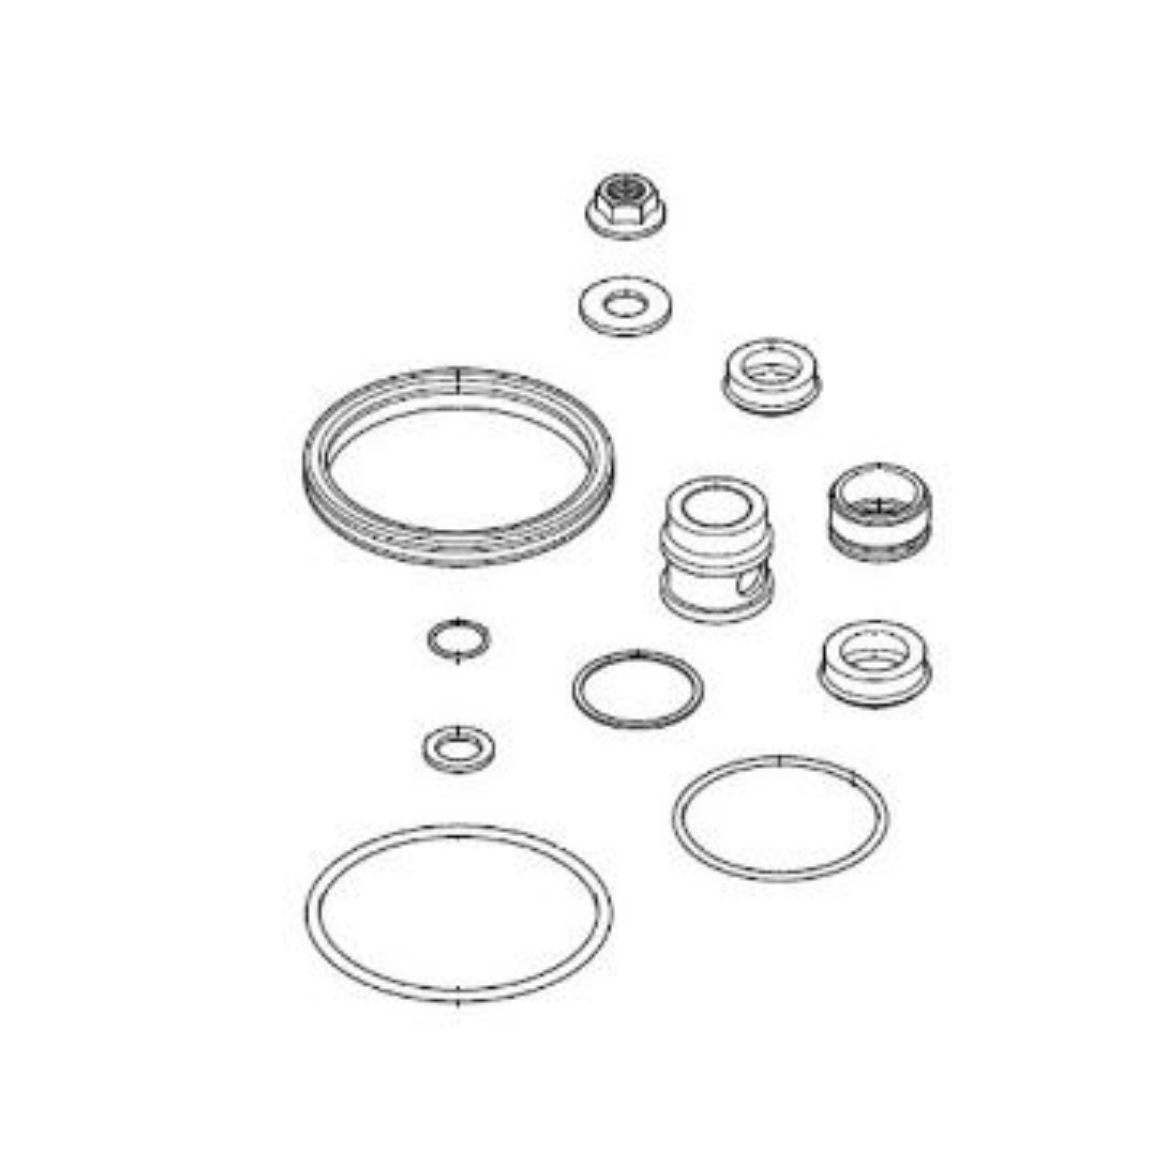 Picture of Alemite Major Repair Kit for High Pressure Grease Pumps [Includes tube of 393590 Teflon Grease]